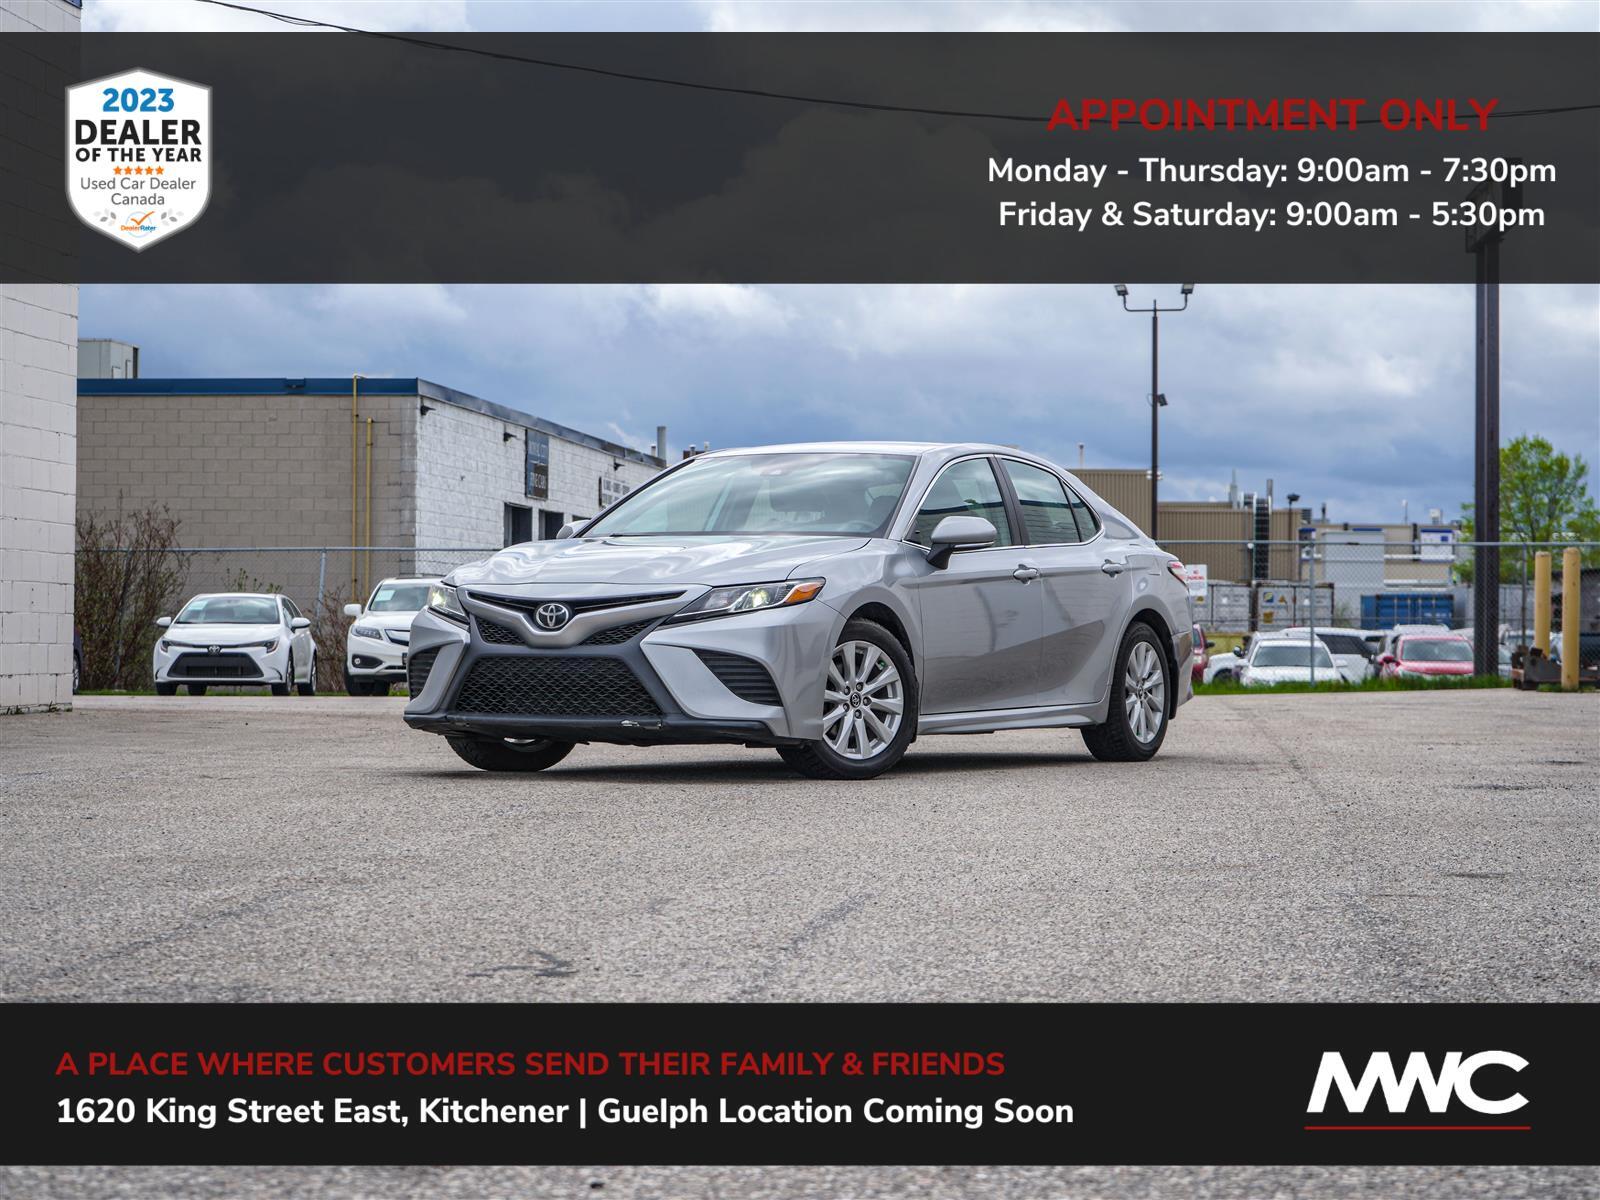 2020 Toyota Camry SE | IN GUELPH, BY APPT. ONLY